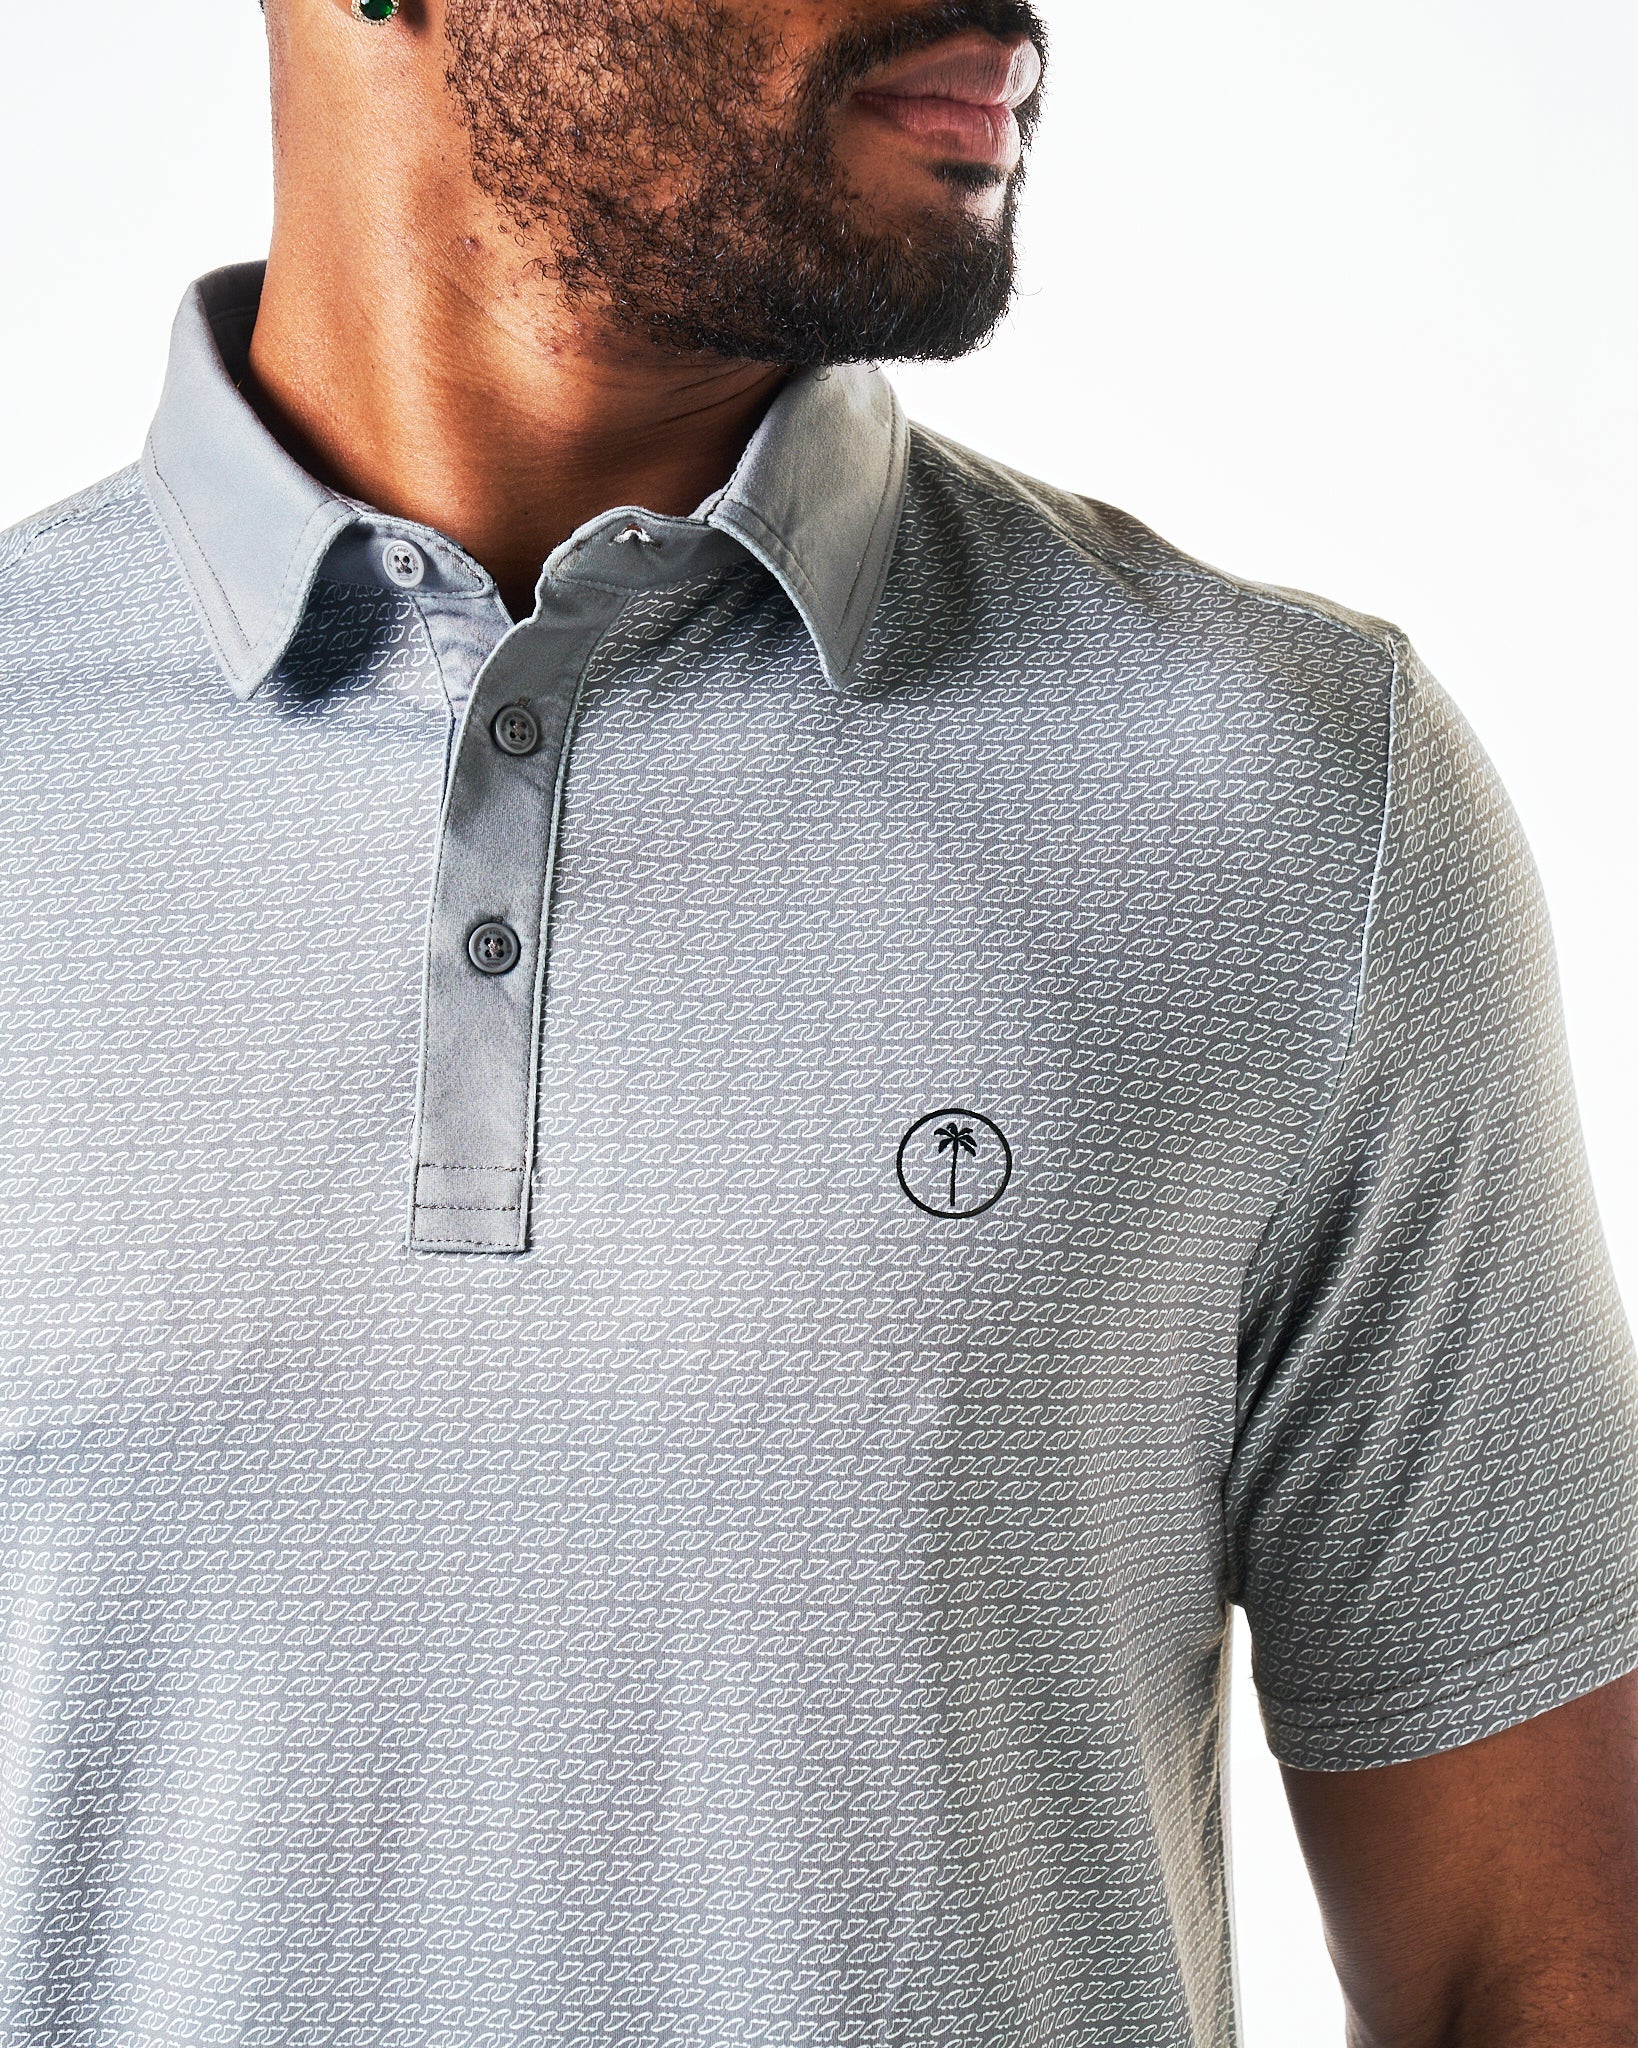 Palm Golf Co. Tailgate Performance Polo